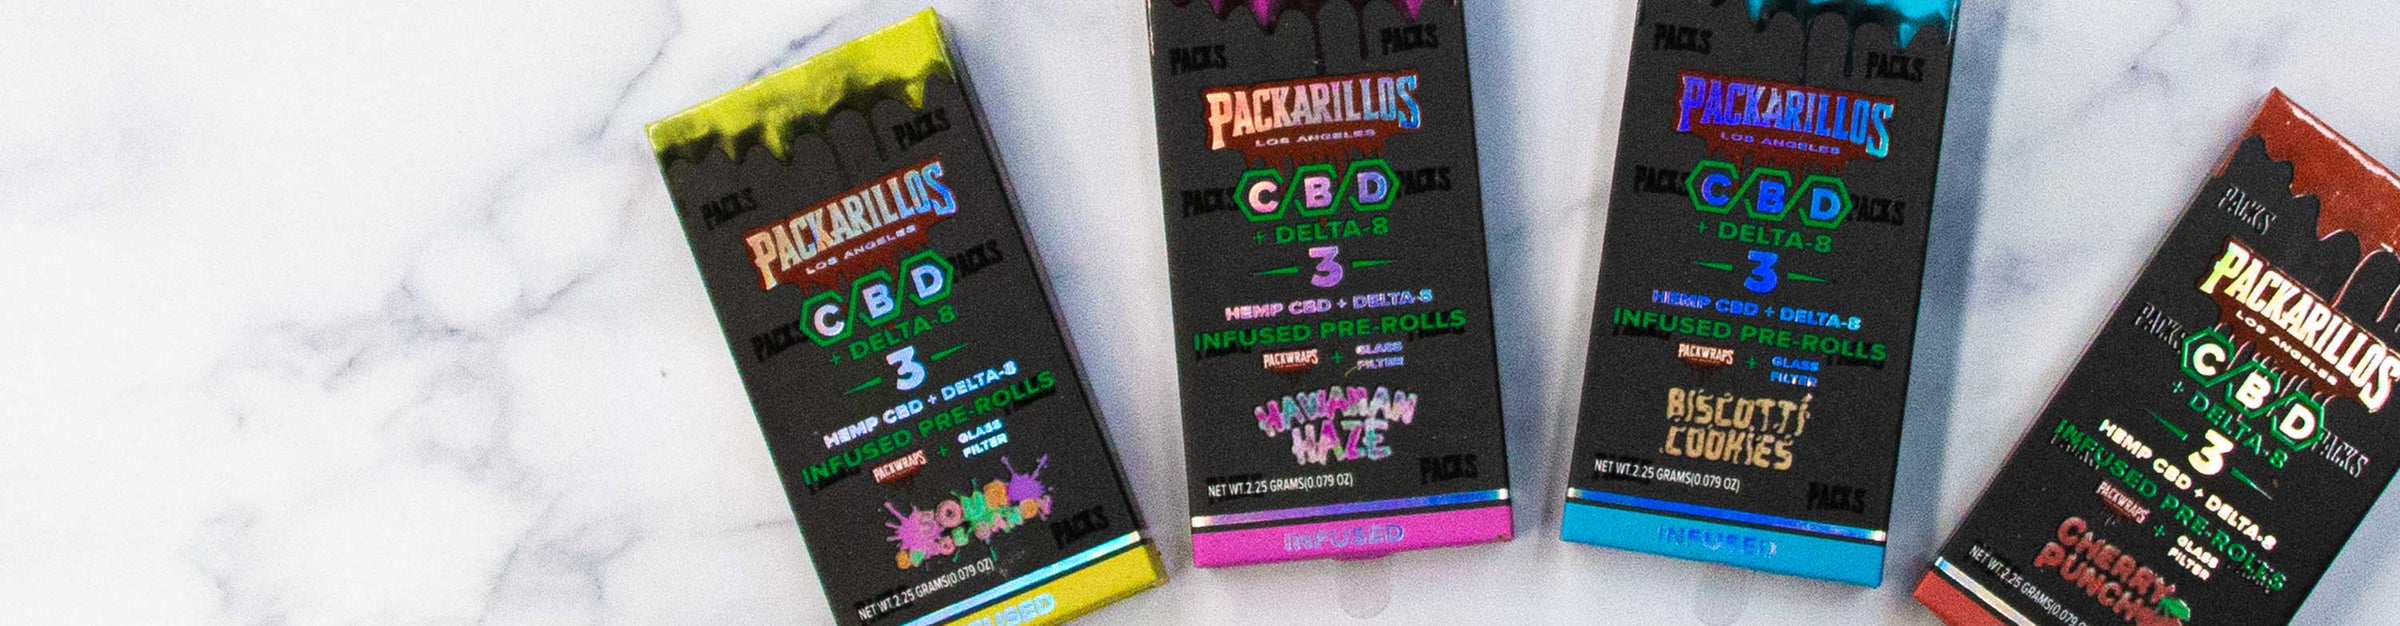 Packarillos CBD products laying down on white marble textured background